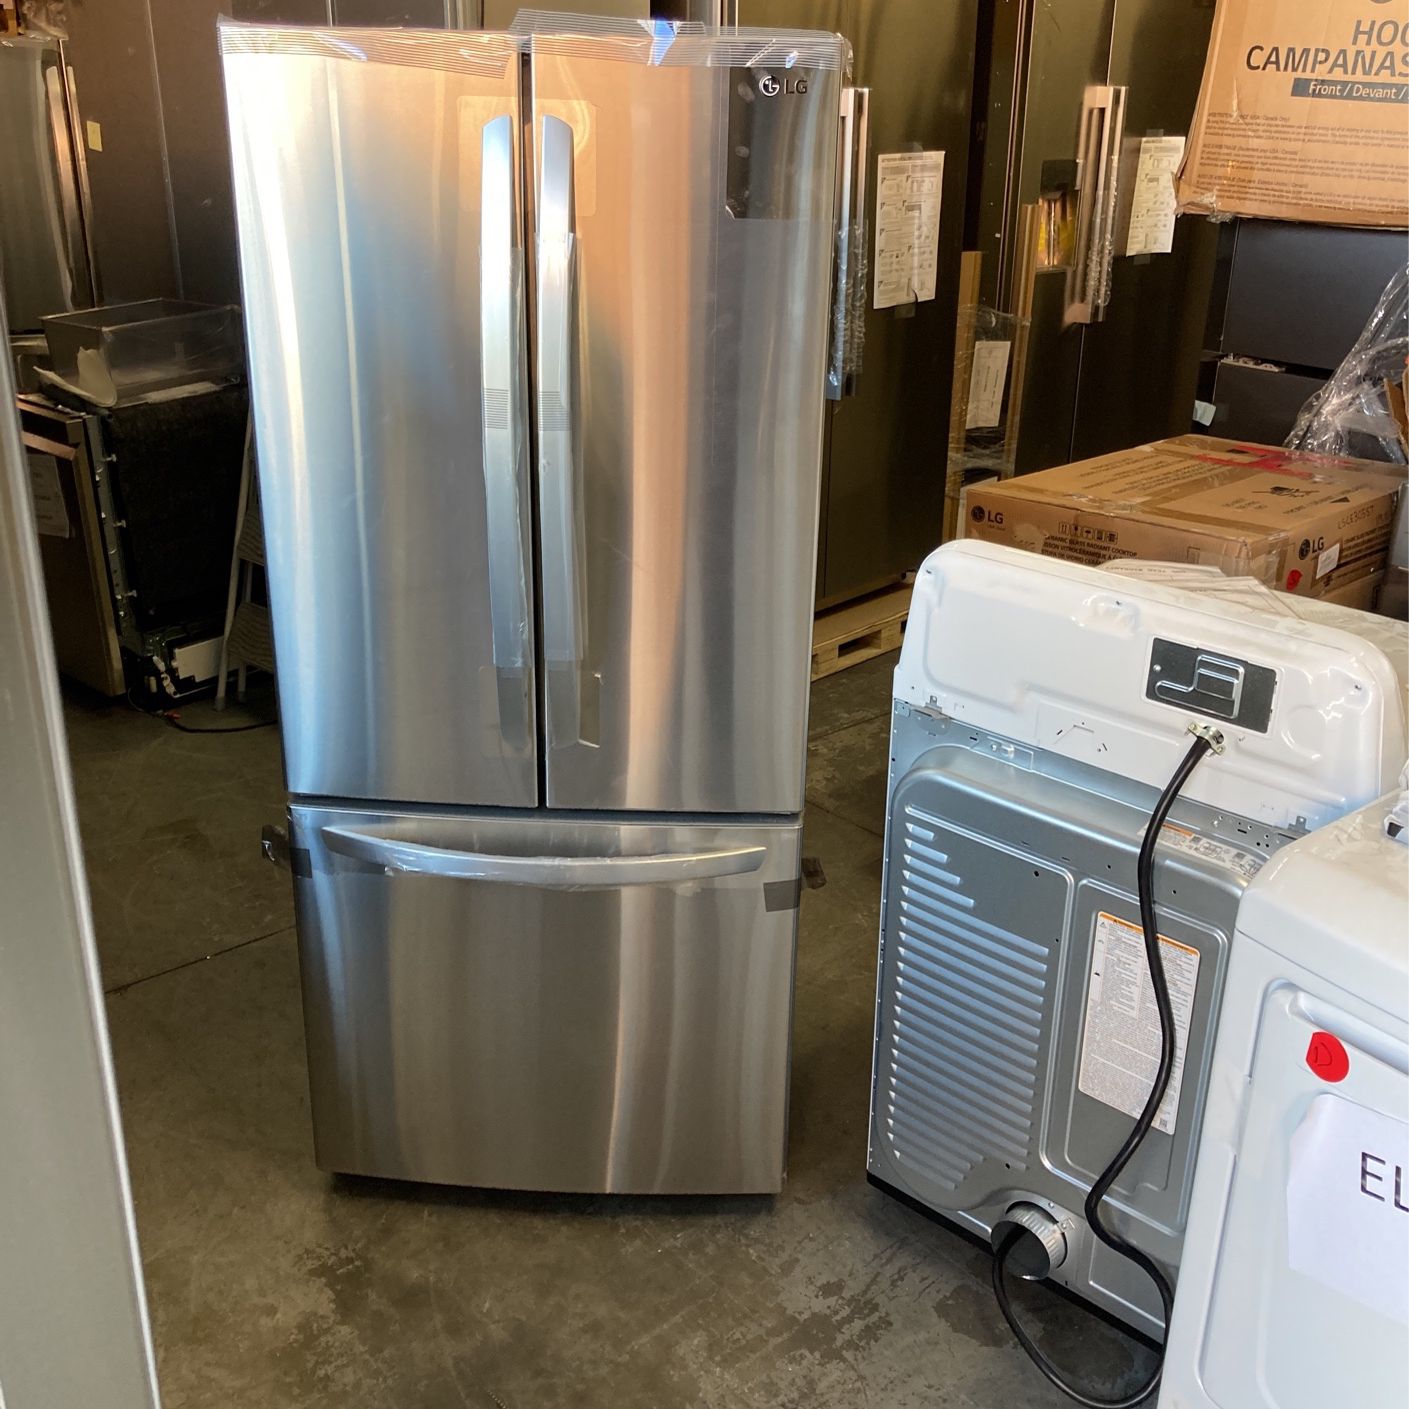 LG 30” W 22 cu. ft. French Door Refrigerator with Ice Maker in Stainless Steel